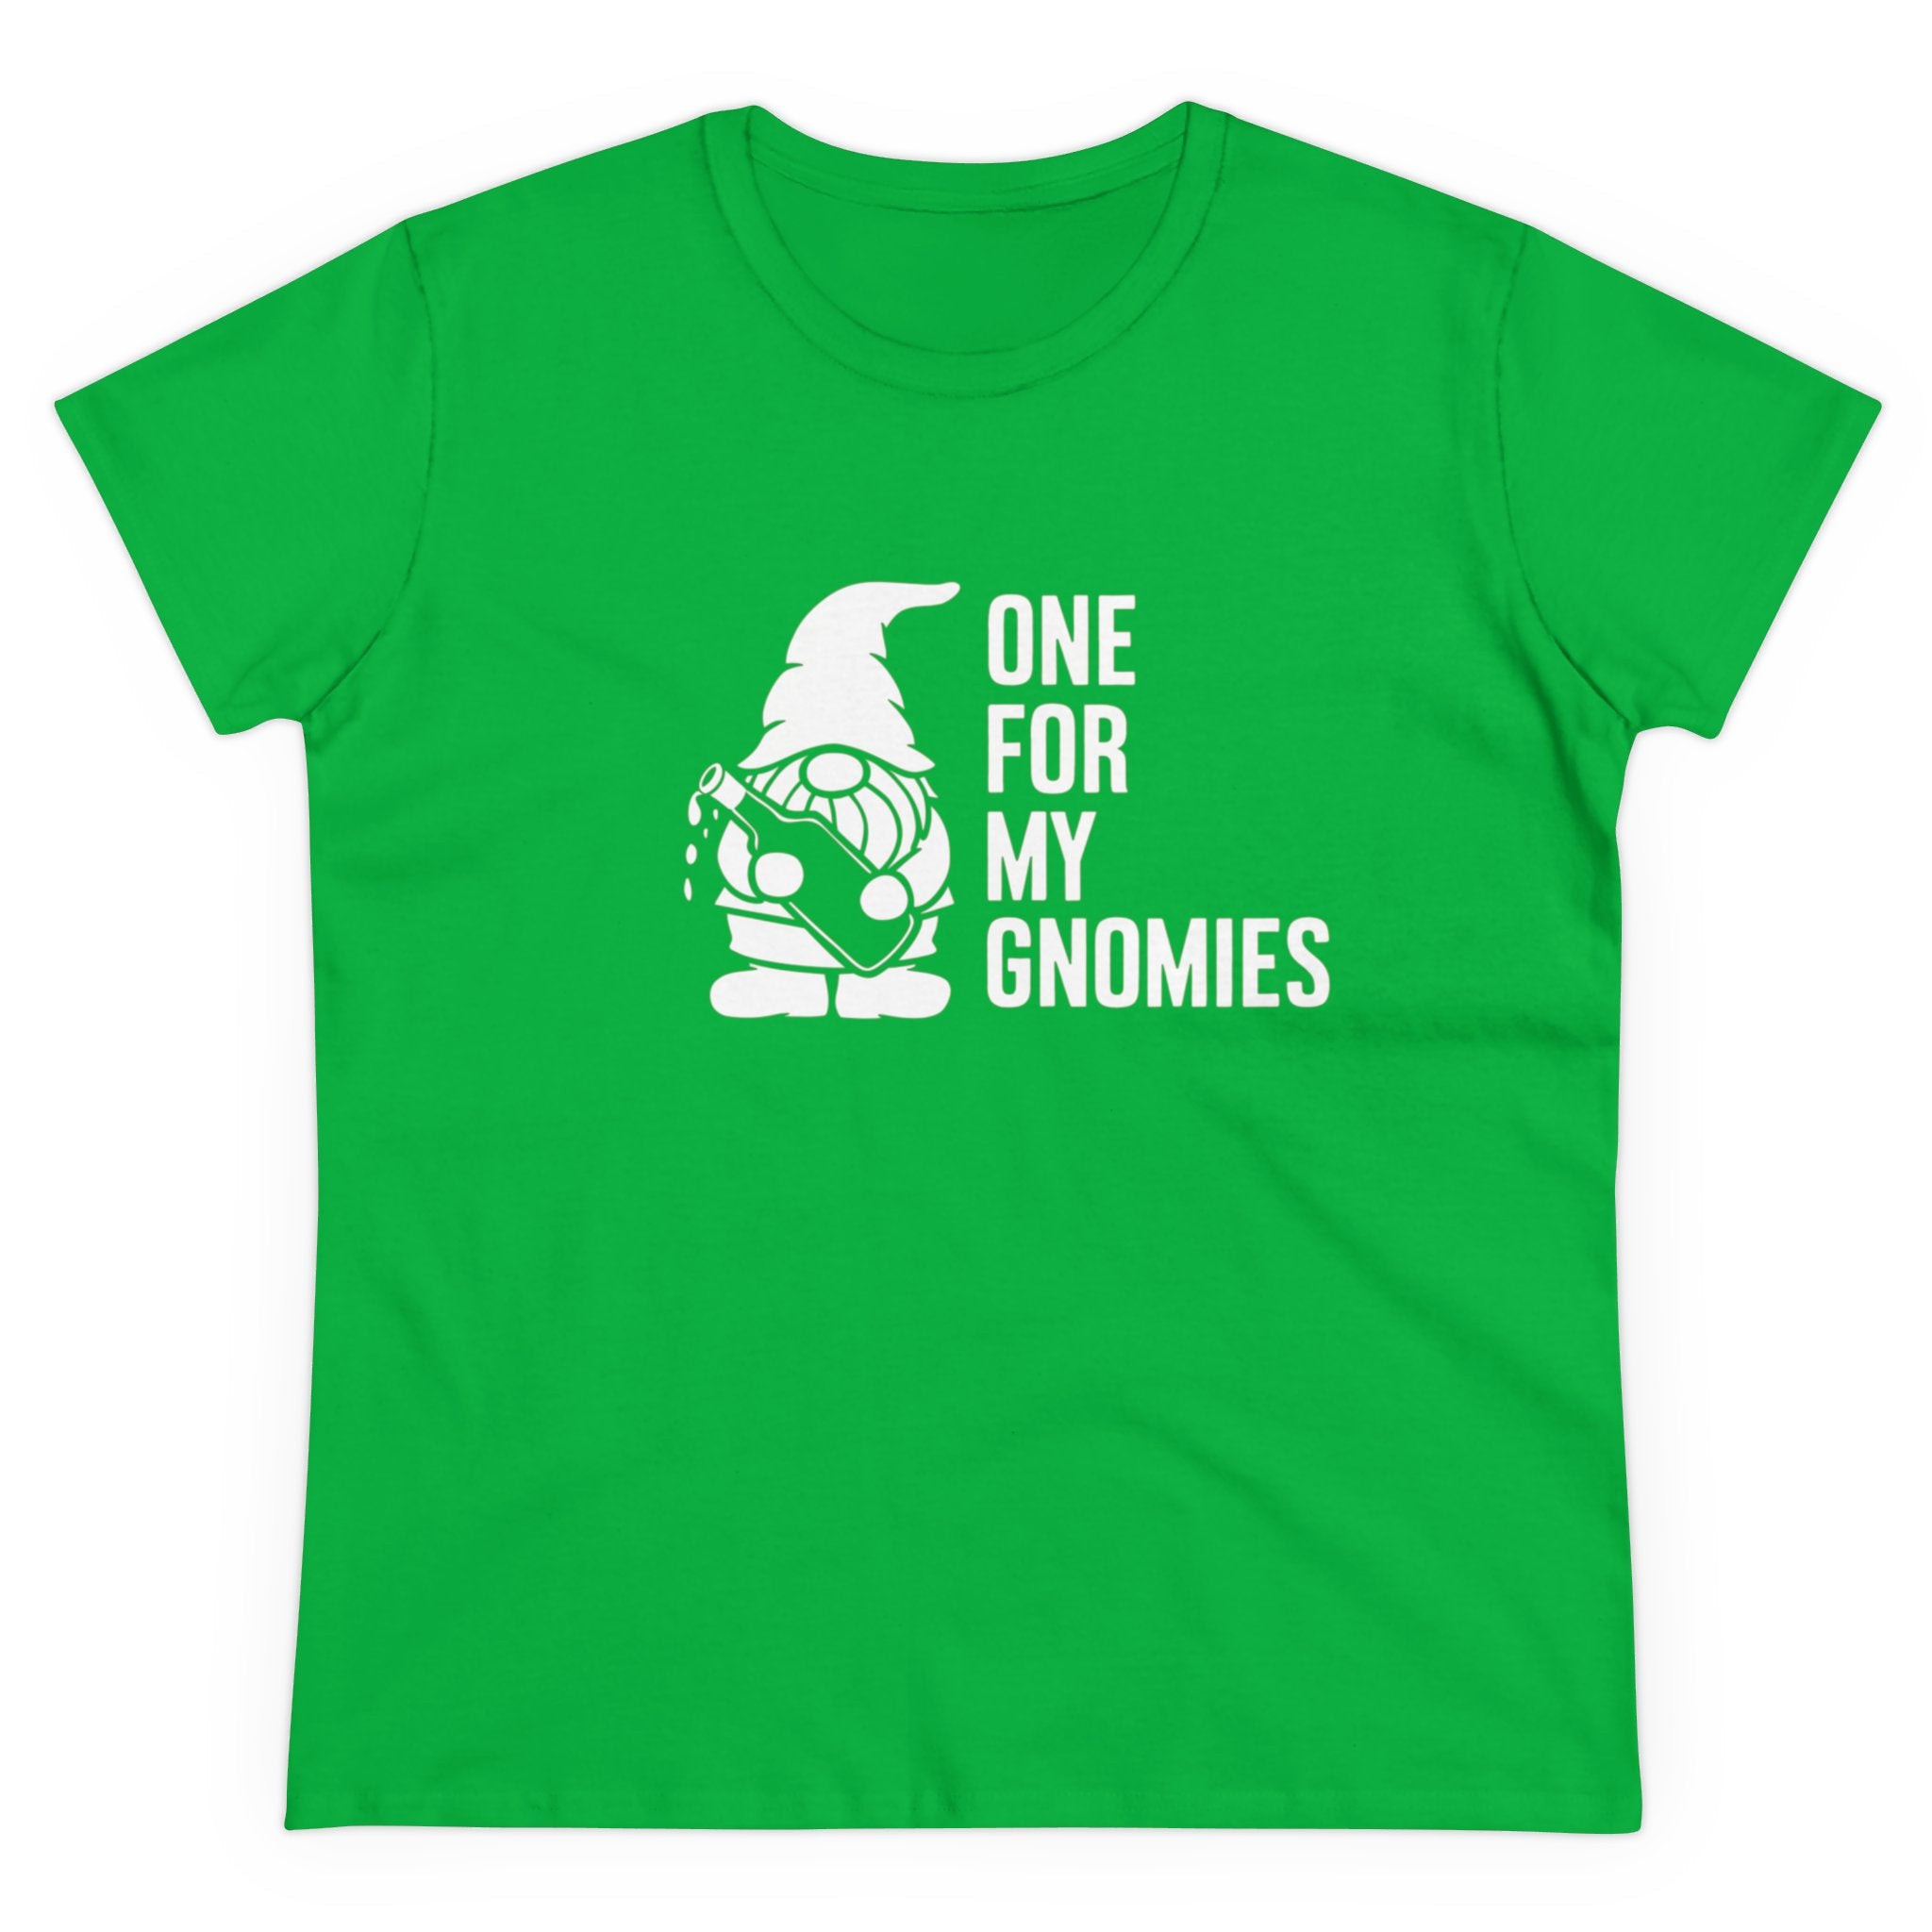 A pre-shrunk cotton green t-shirt featuring a graphic of a gnome holding a beer mug and the text "One for my gnomies," this One For My Gnomies - Women's Tee combines style and comfort seamlessly.